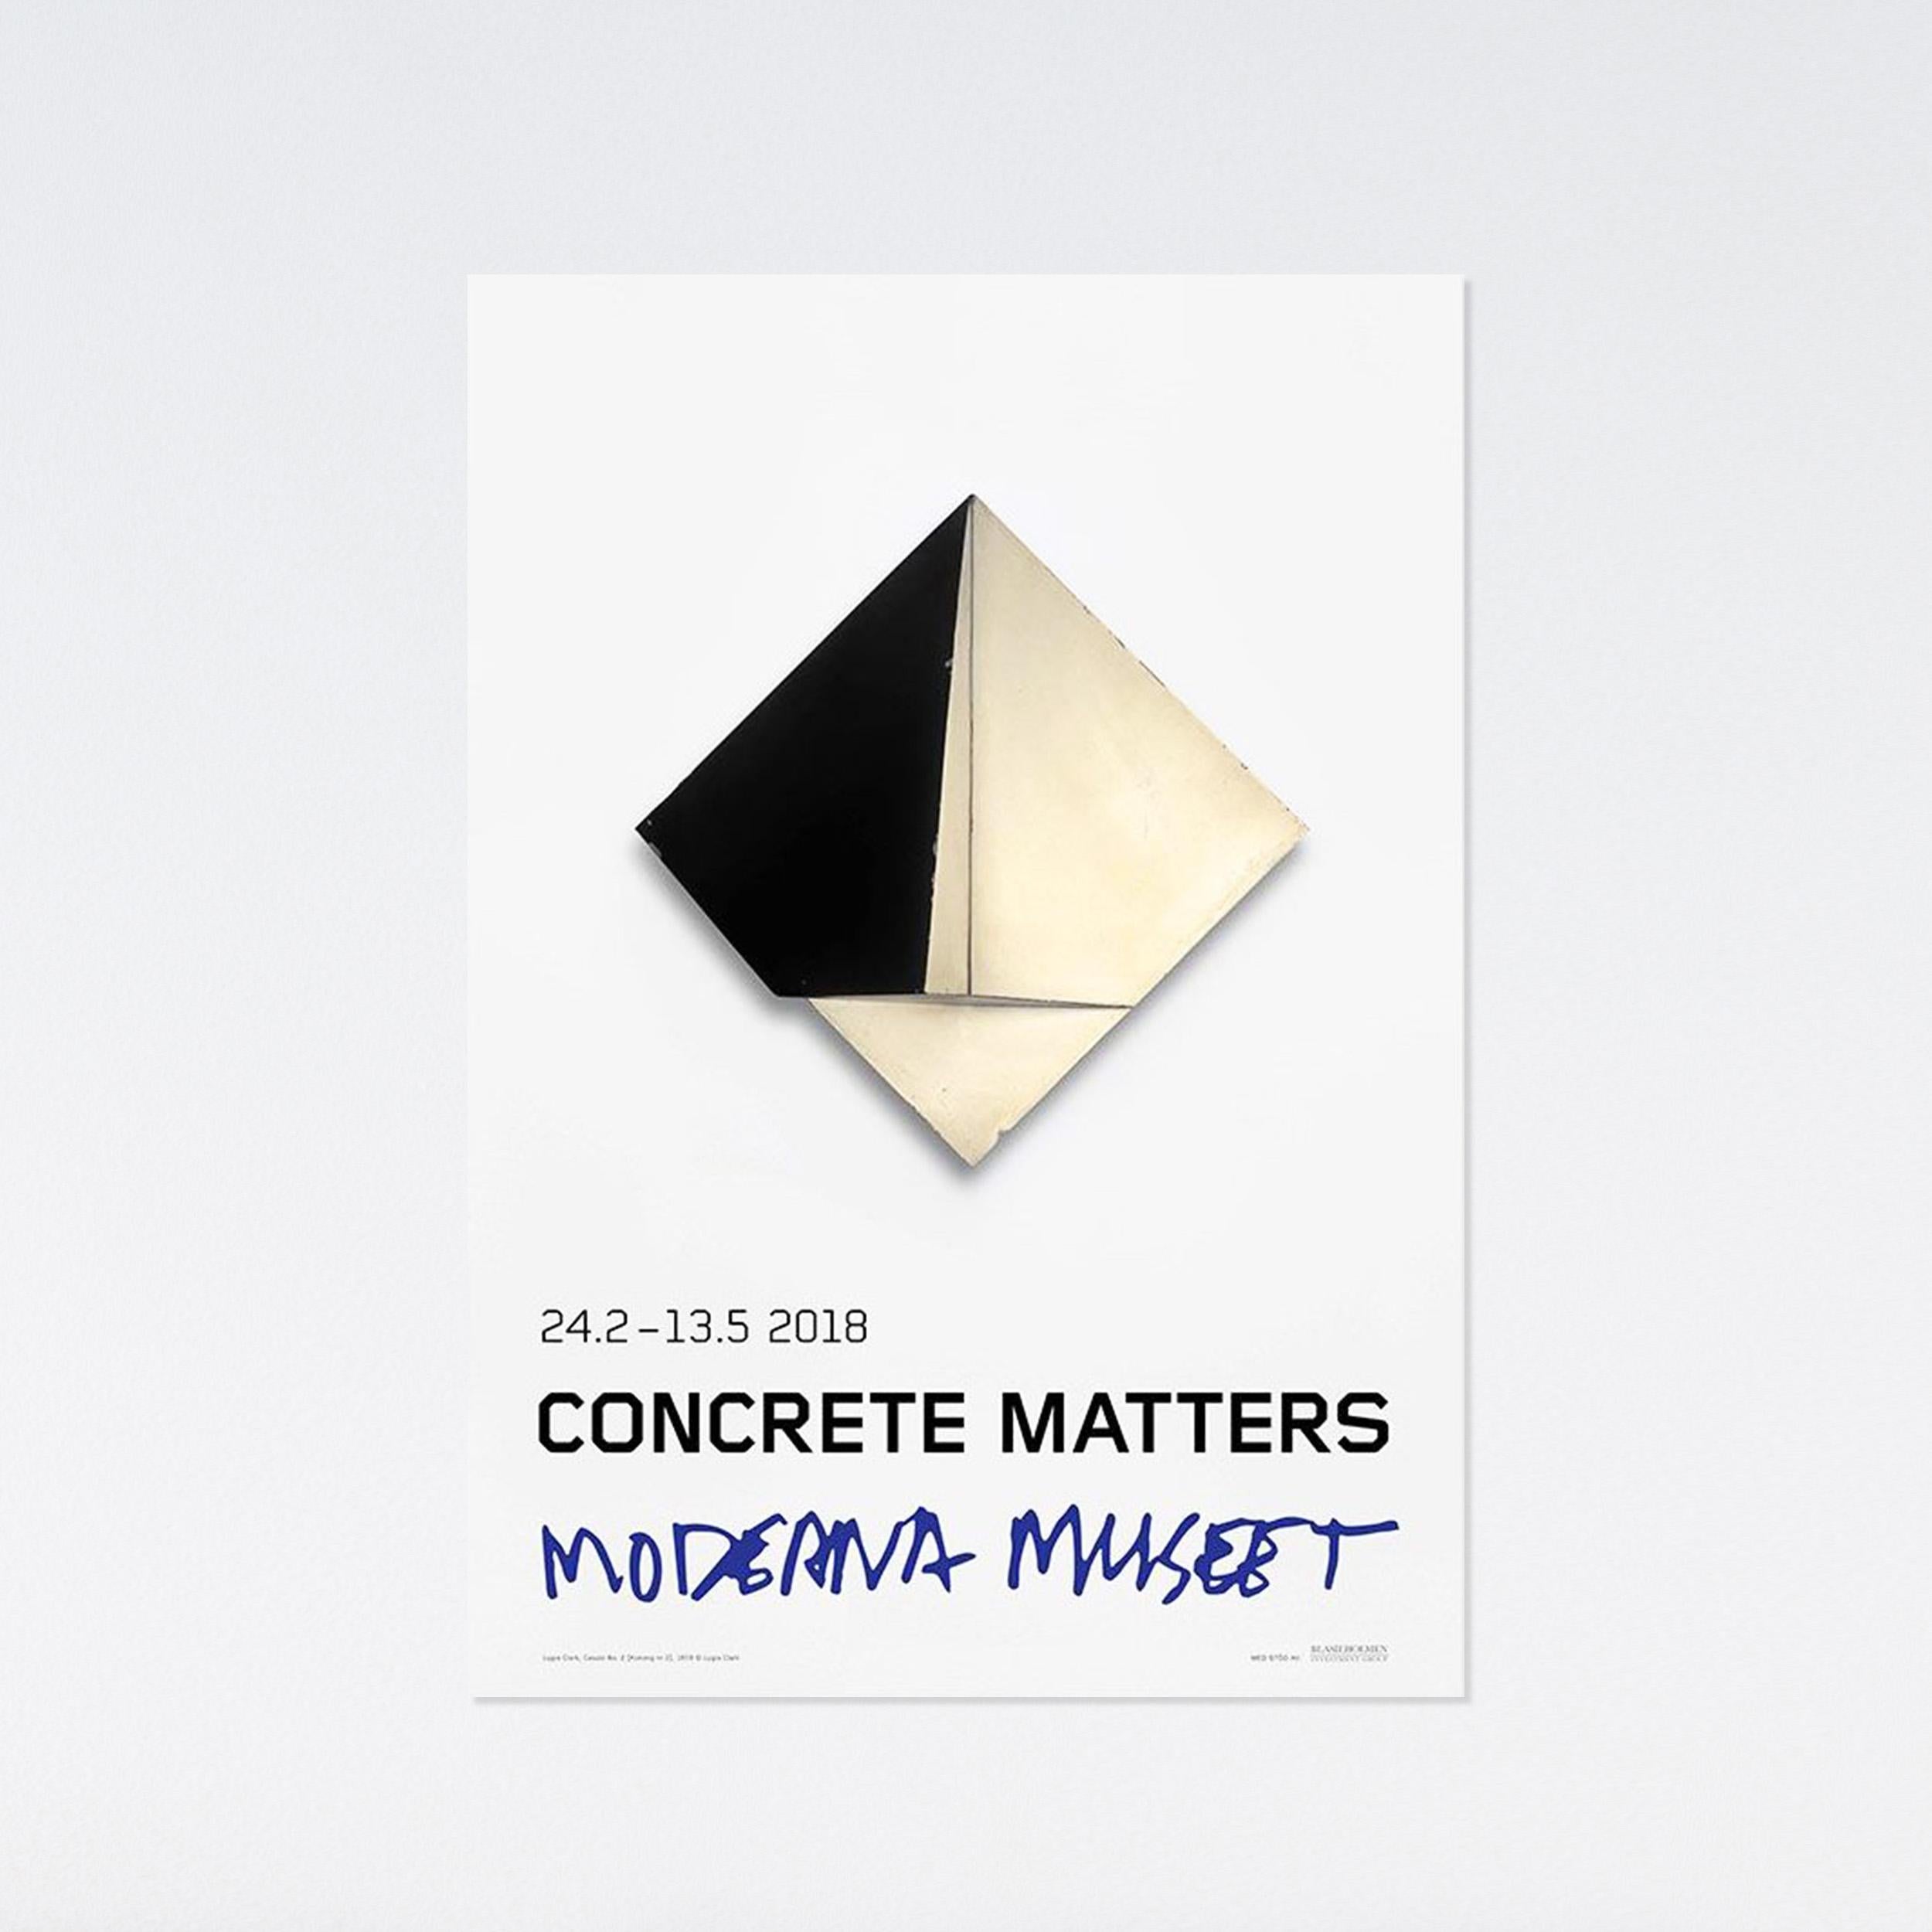 2018 exhibition poster featuring the work of Lygia Clark made on the occasion of the Moderna Museet's group exhibition, "Concrete Matters".

27.55 x 39.37 in
70 x 100 cm

Lygia Clark was born in Belo Horizonte, Brazil, and studied landscape